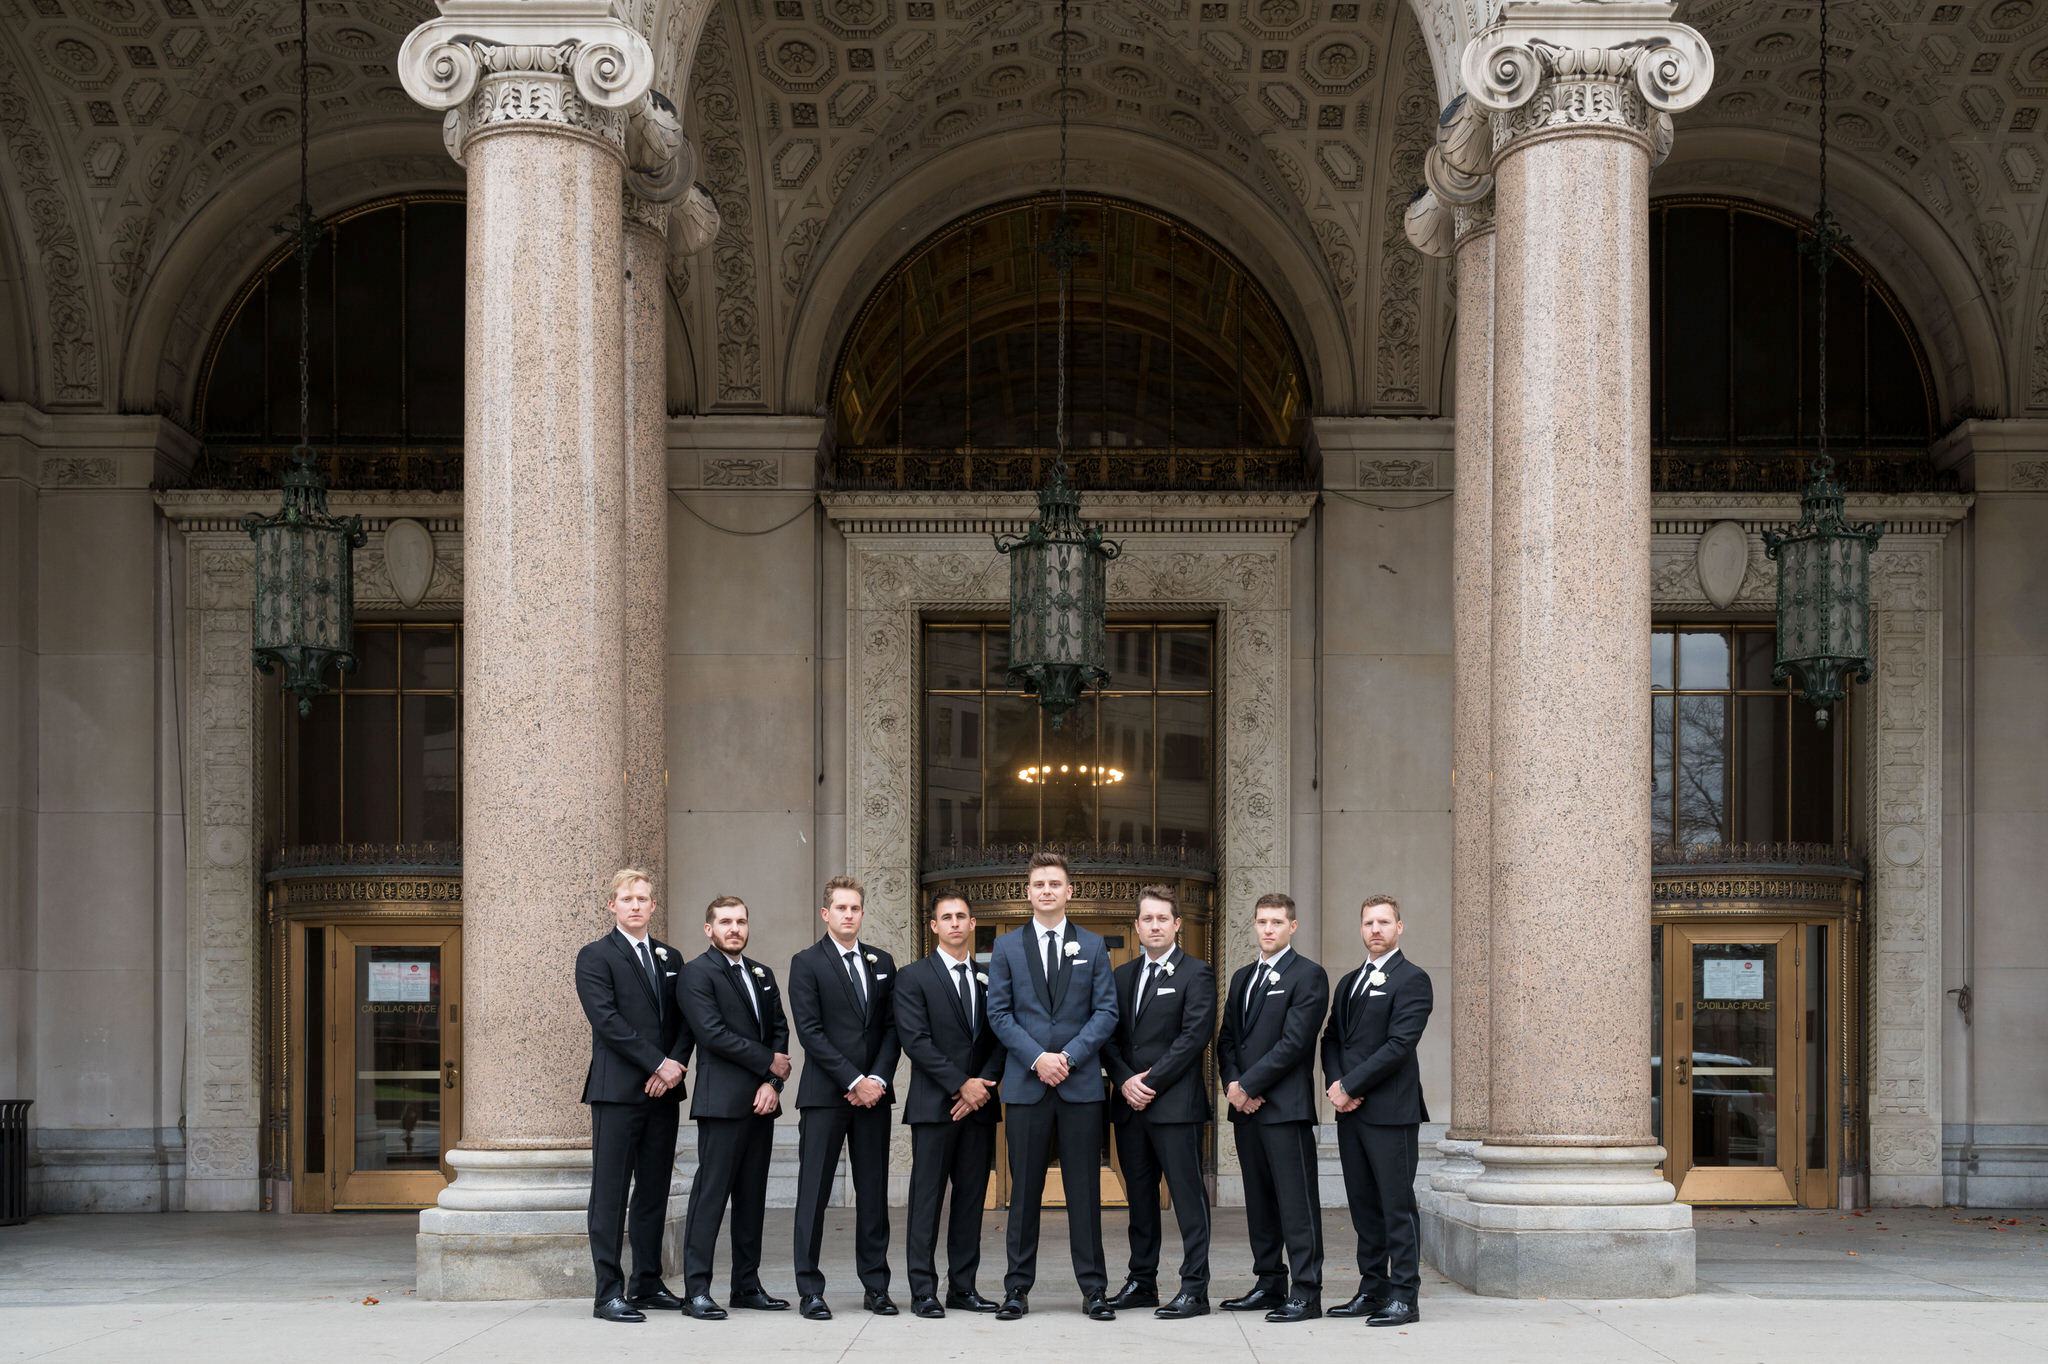 Groomsmen pose in front of the Cadillac Place apartments in Detroit, MI.   